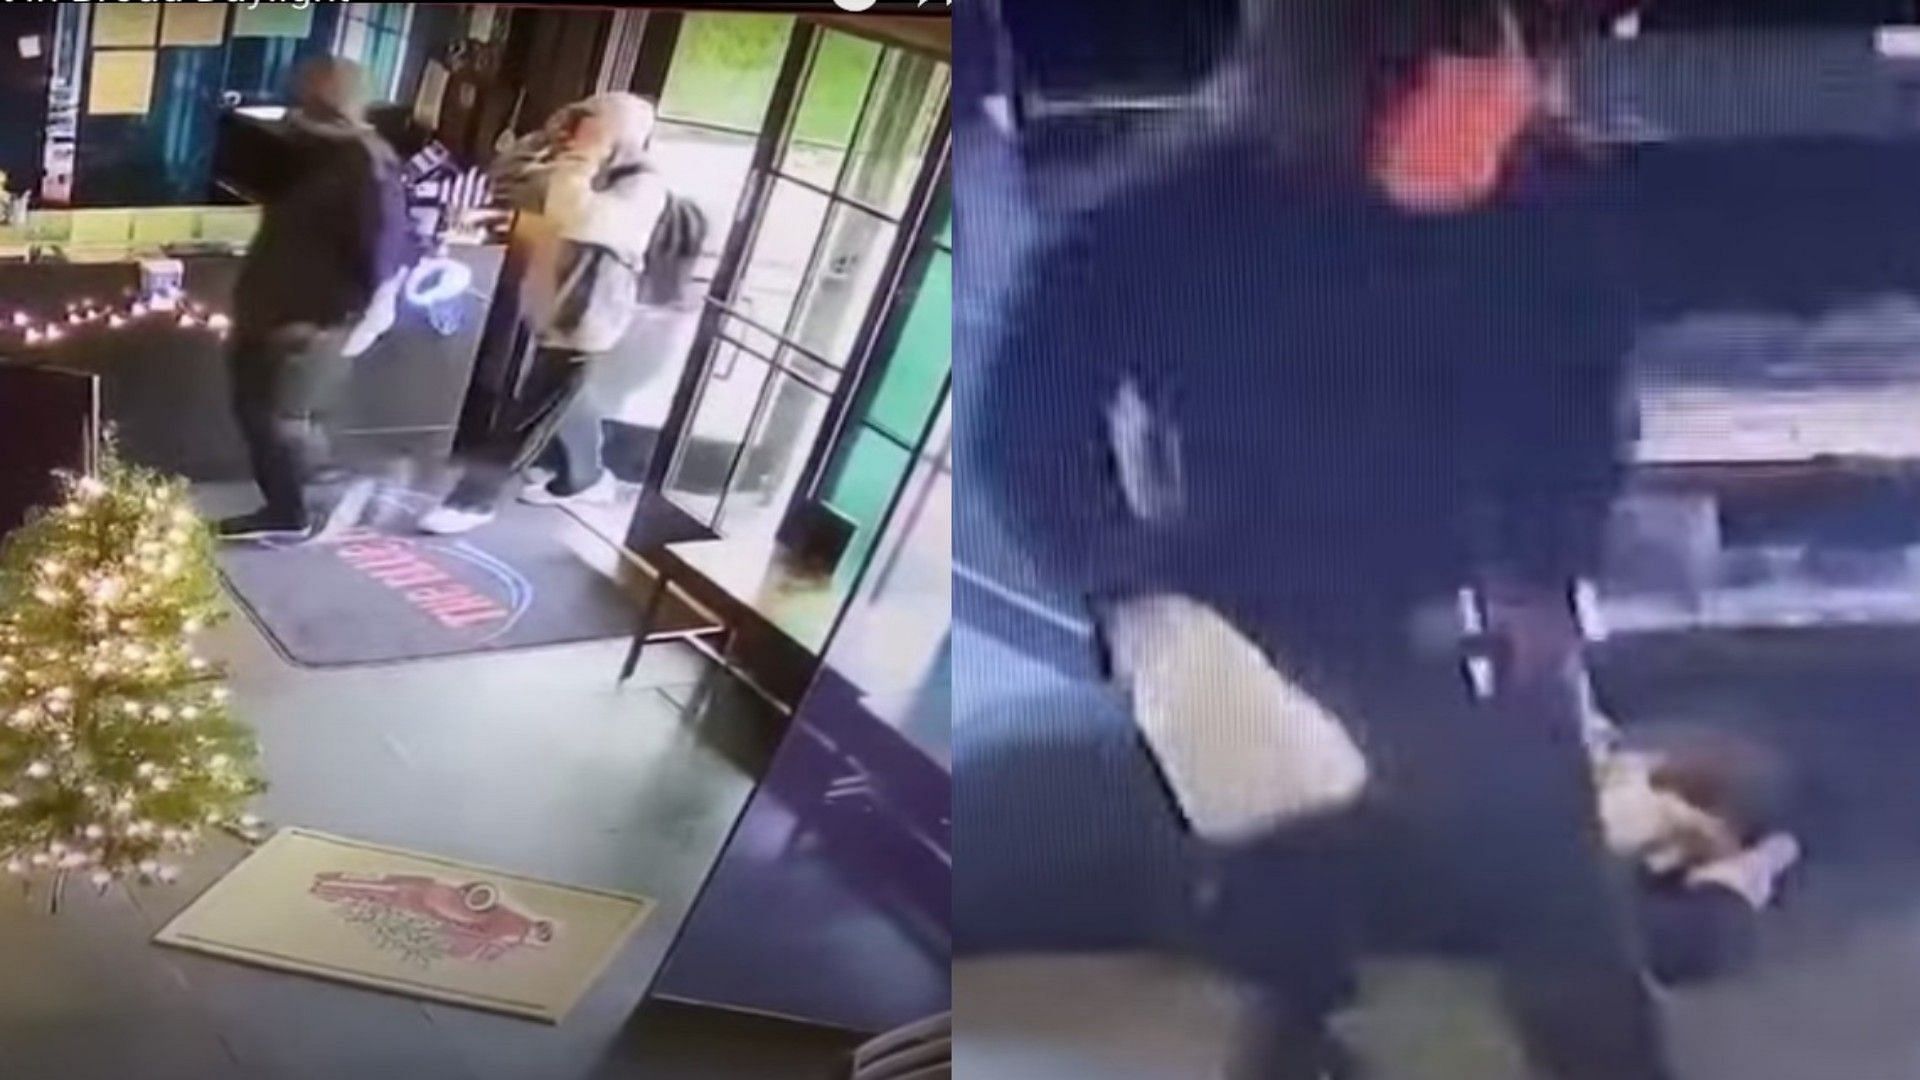  Two armed suspects rob a Houston sushi restaurant in broad Daylight (Image via Law&amp;Crime/YouTube)